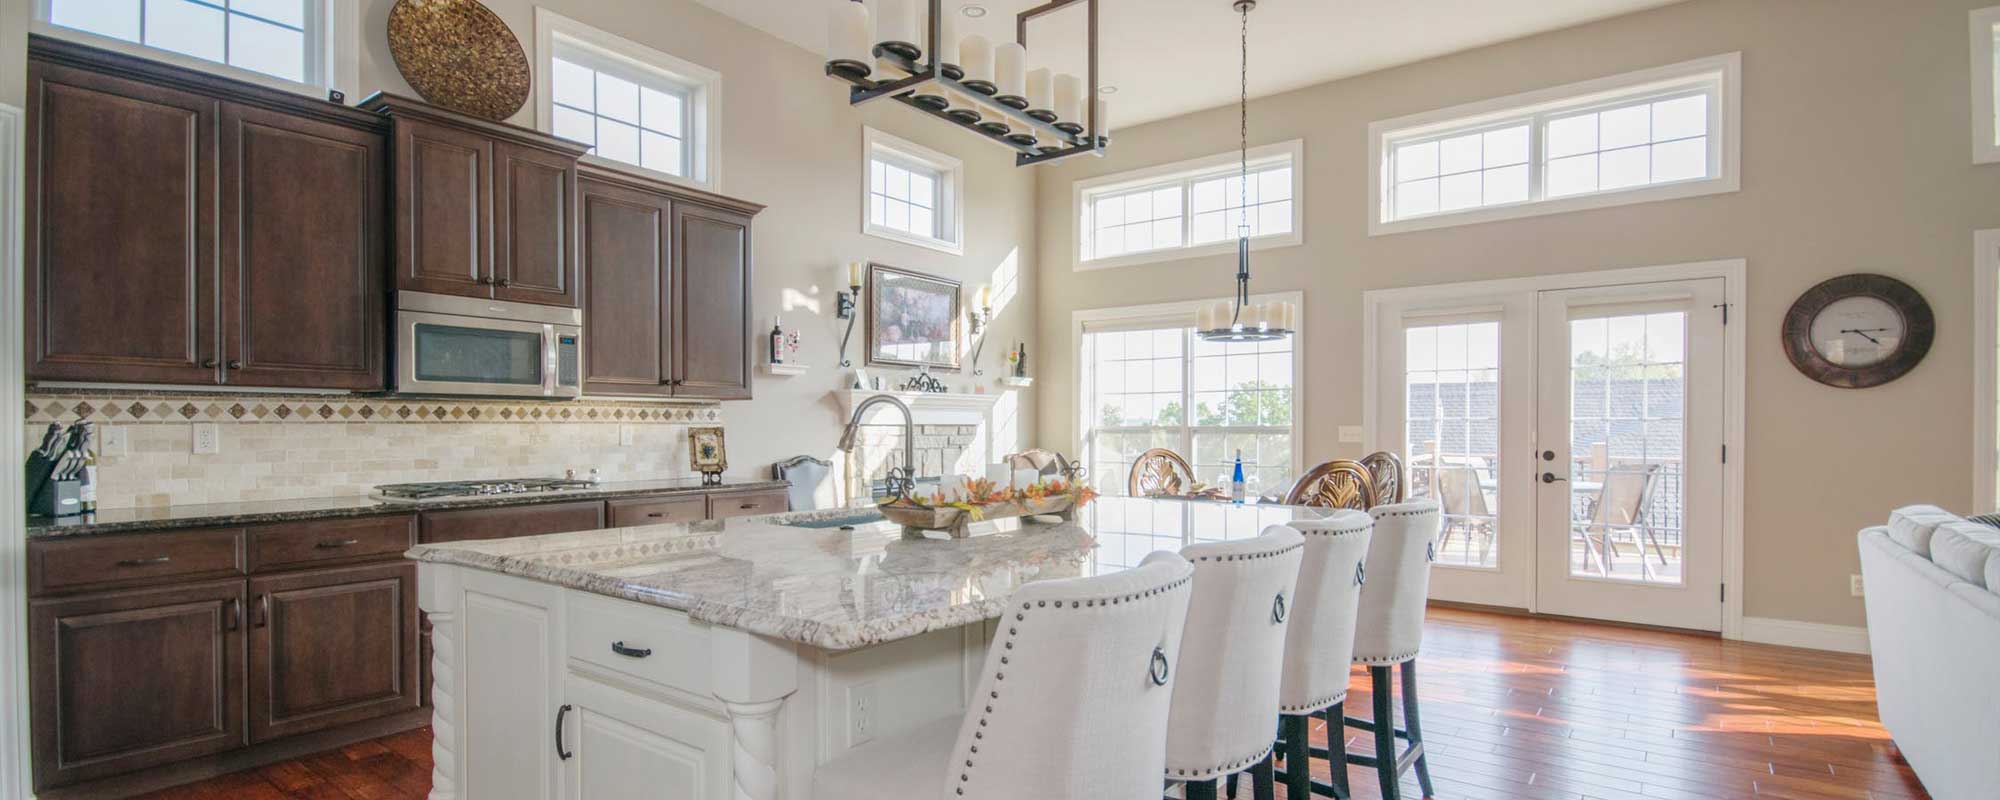 Sunny kitchen with white and brown cabinets